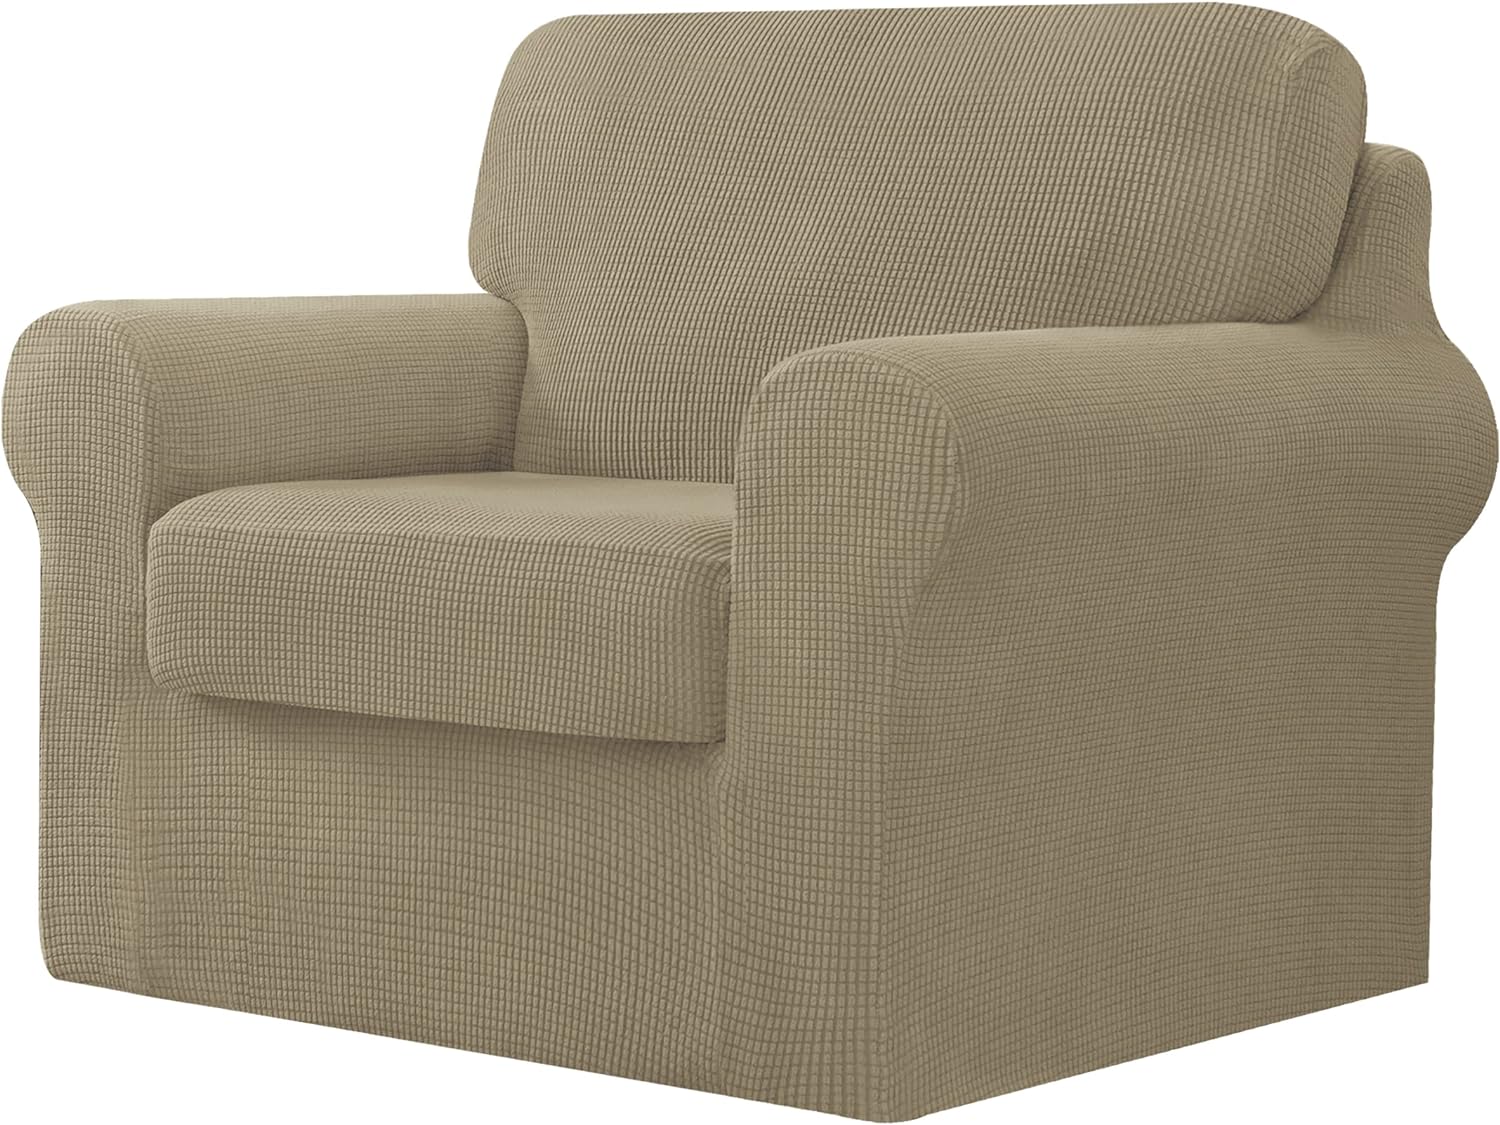 CHUN YI 3 Piece Stretch Armchair Sofa Cover, 1 Seater Couch Slipcover with One Separate Backrest and Cushion with Elastic Band, Checks Spandex Jacquard Fabric(Small,Sand)